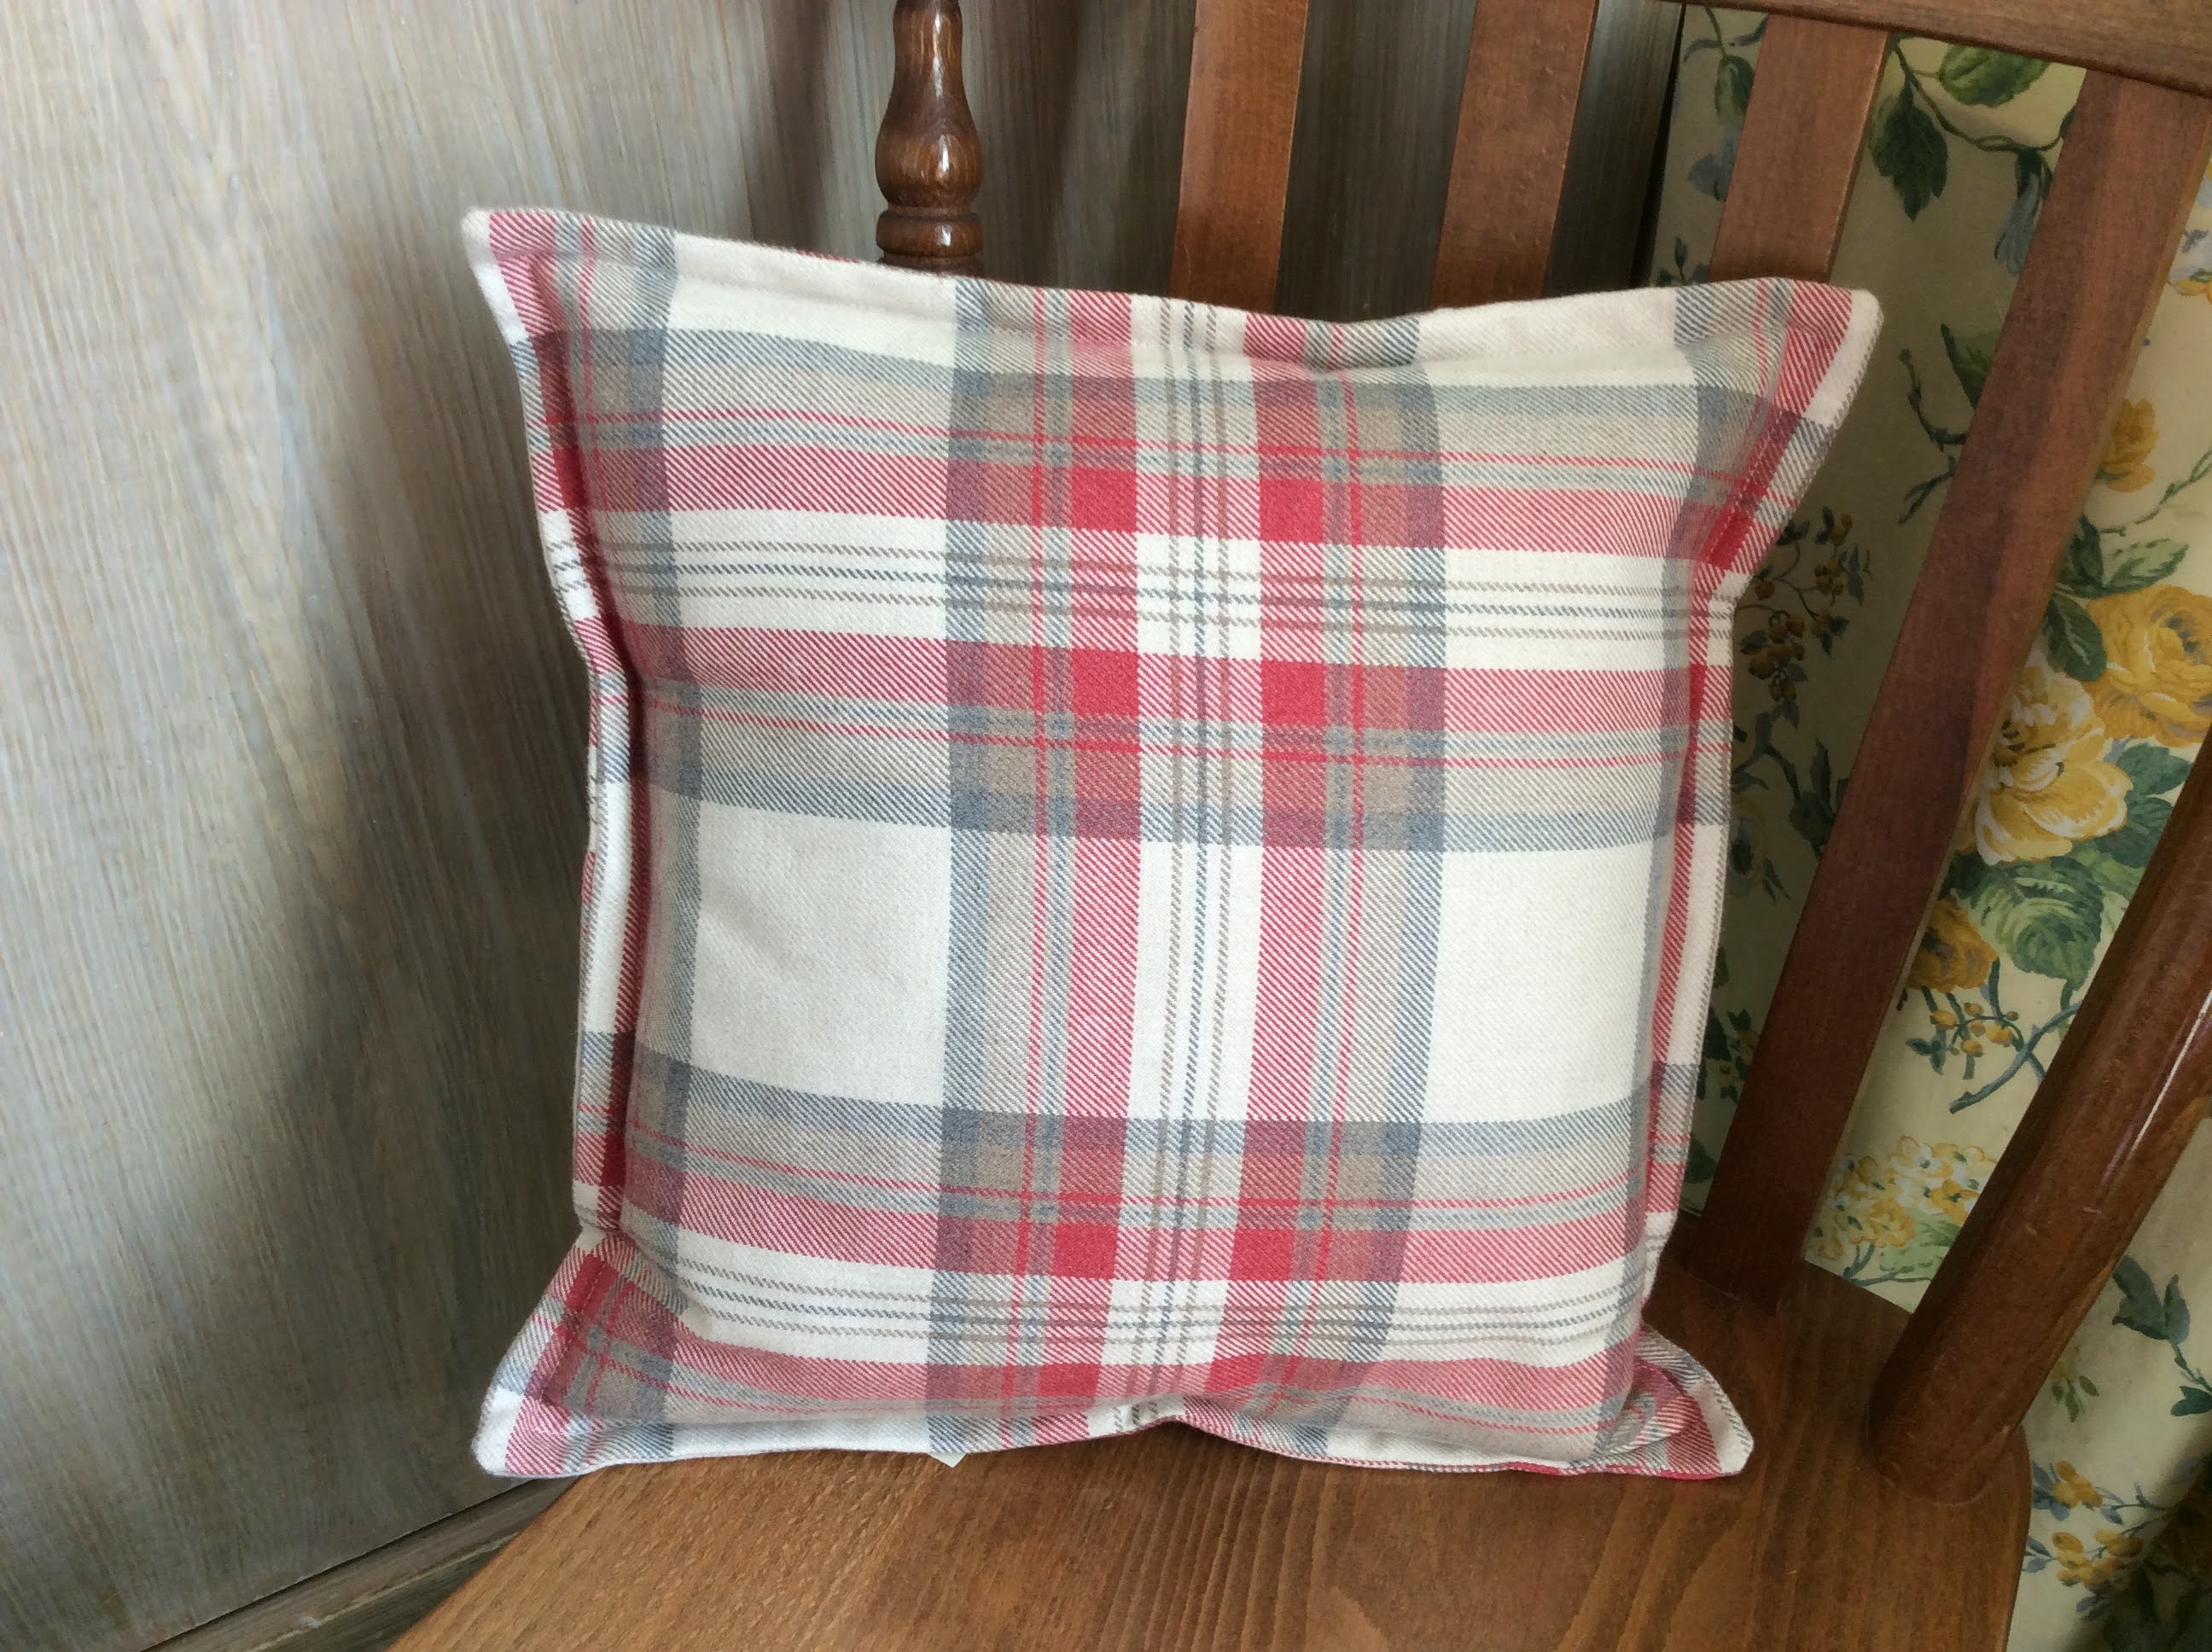 Cushion - red and beige checks